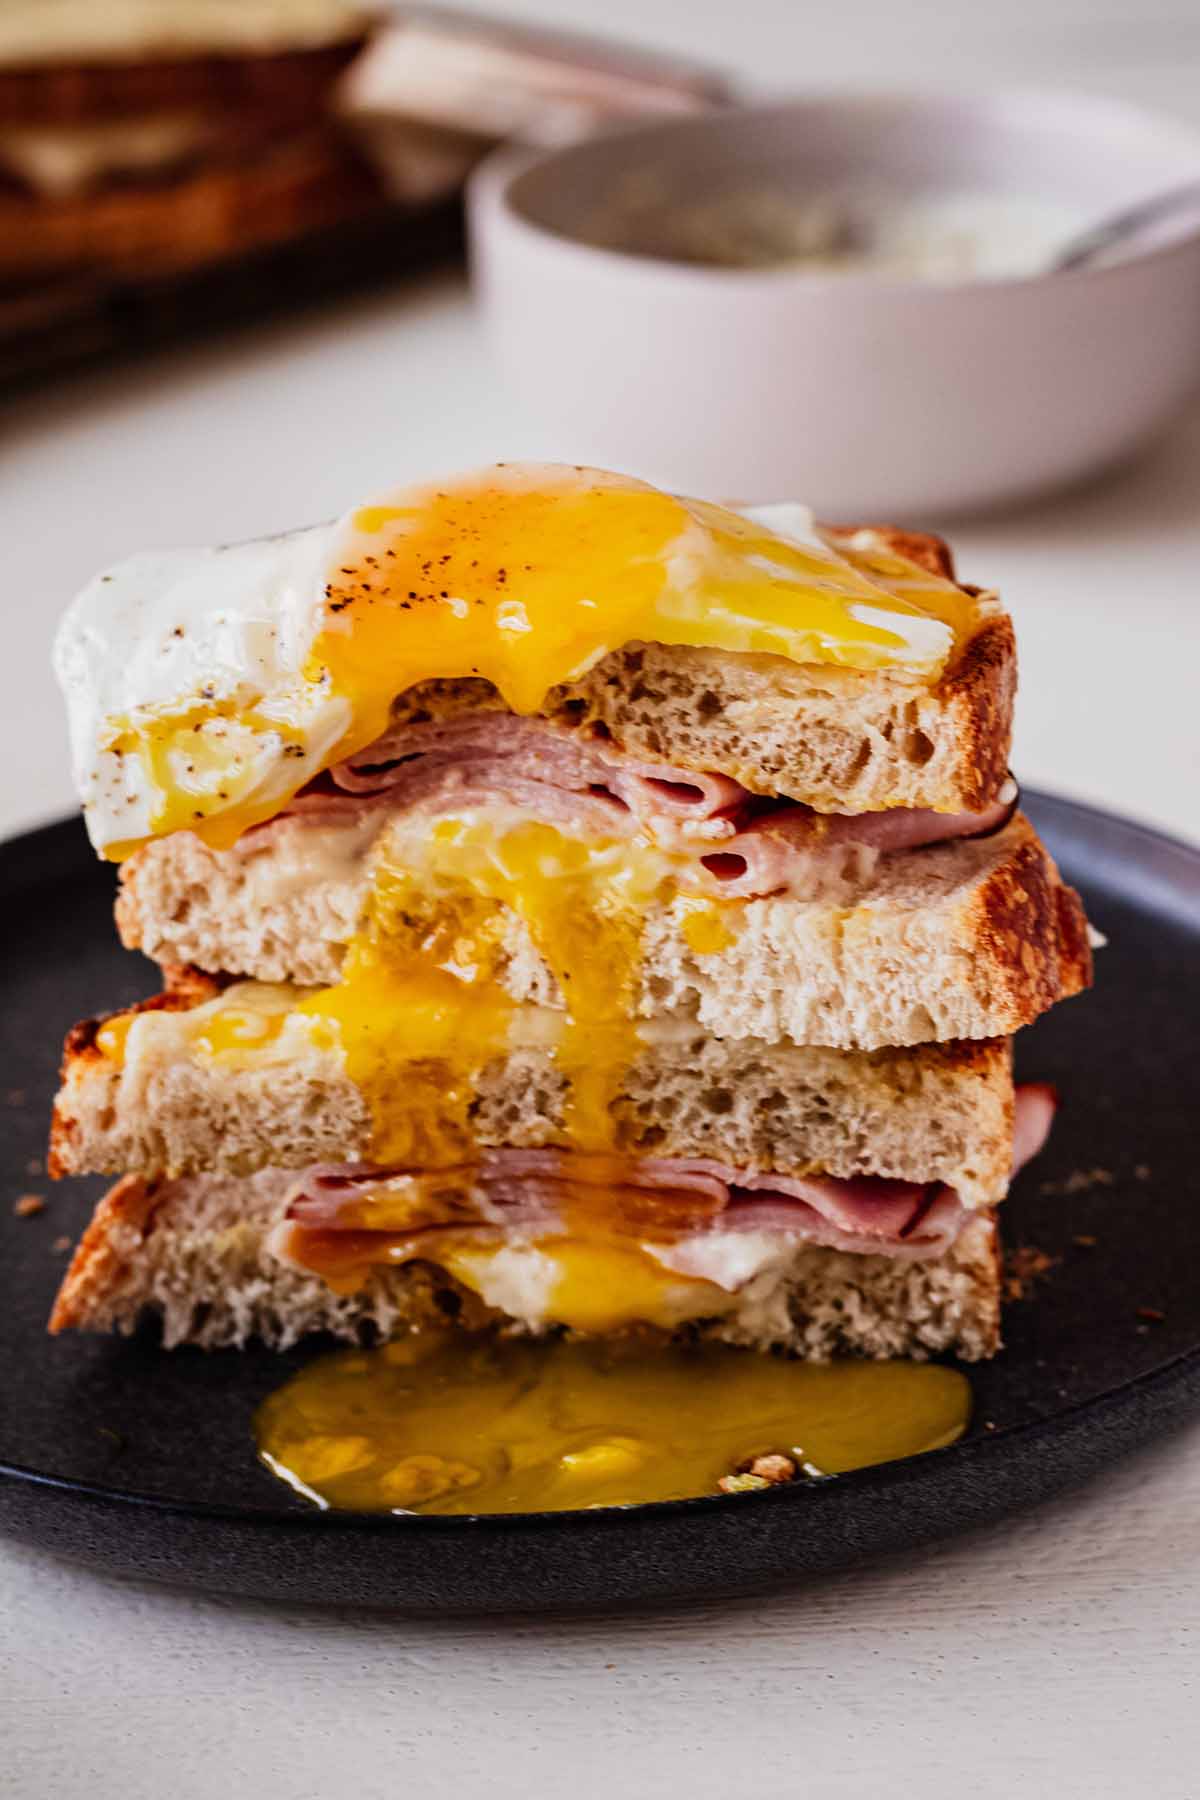 Croque madame with runny egg yolk stacked on a grey plate